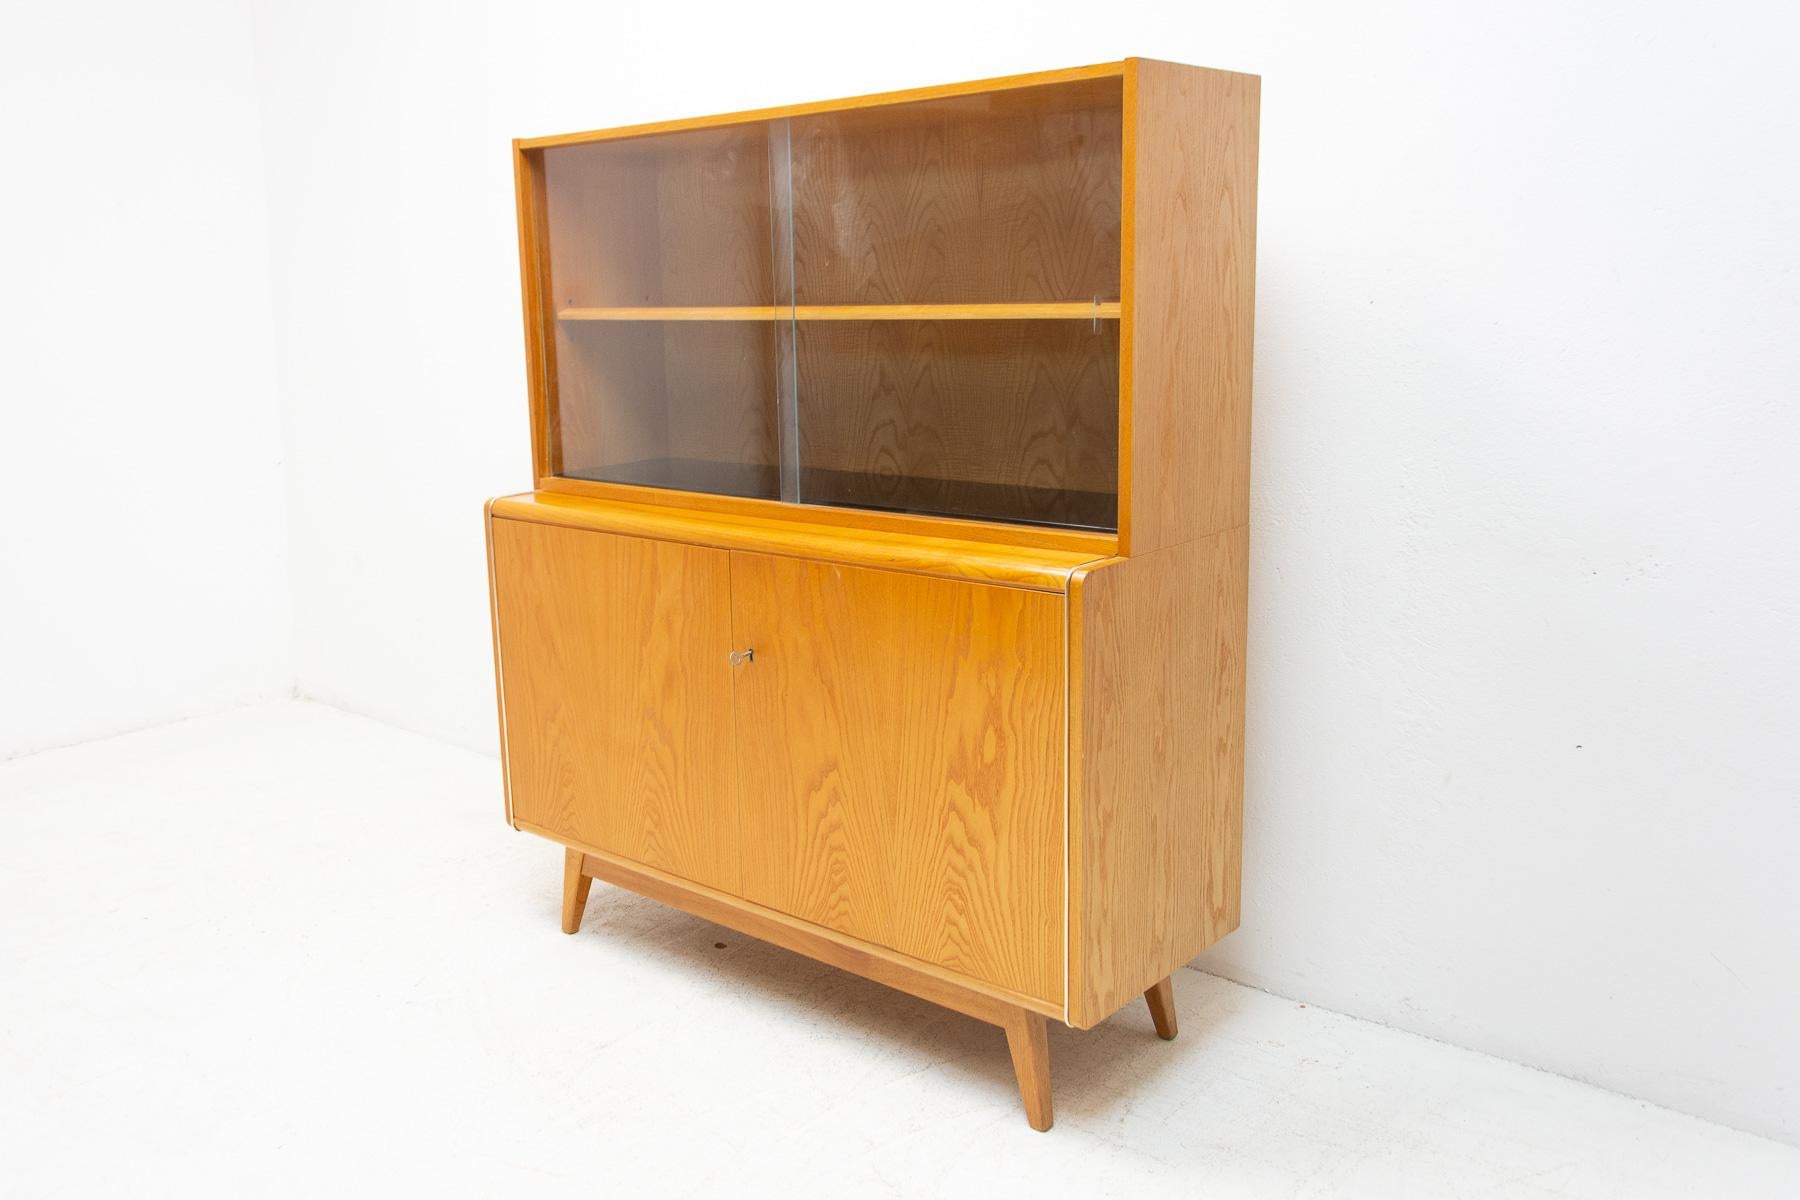 Mid century Vintage bookcase from the 1960s. It was designed by Hubert Nepožitek & Bohumil Landsman for Jitona in the former Czechoslovakia. Features a simple design, a glazed section with a storage spaces. In very good Vintage condition, showing